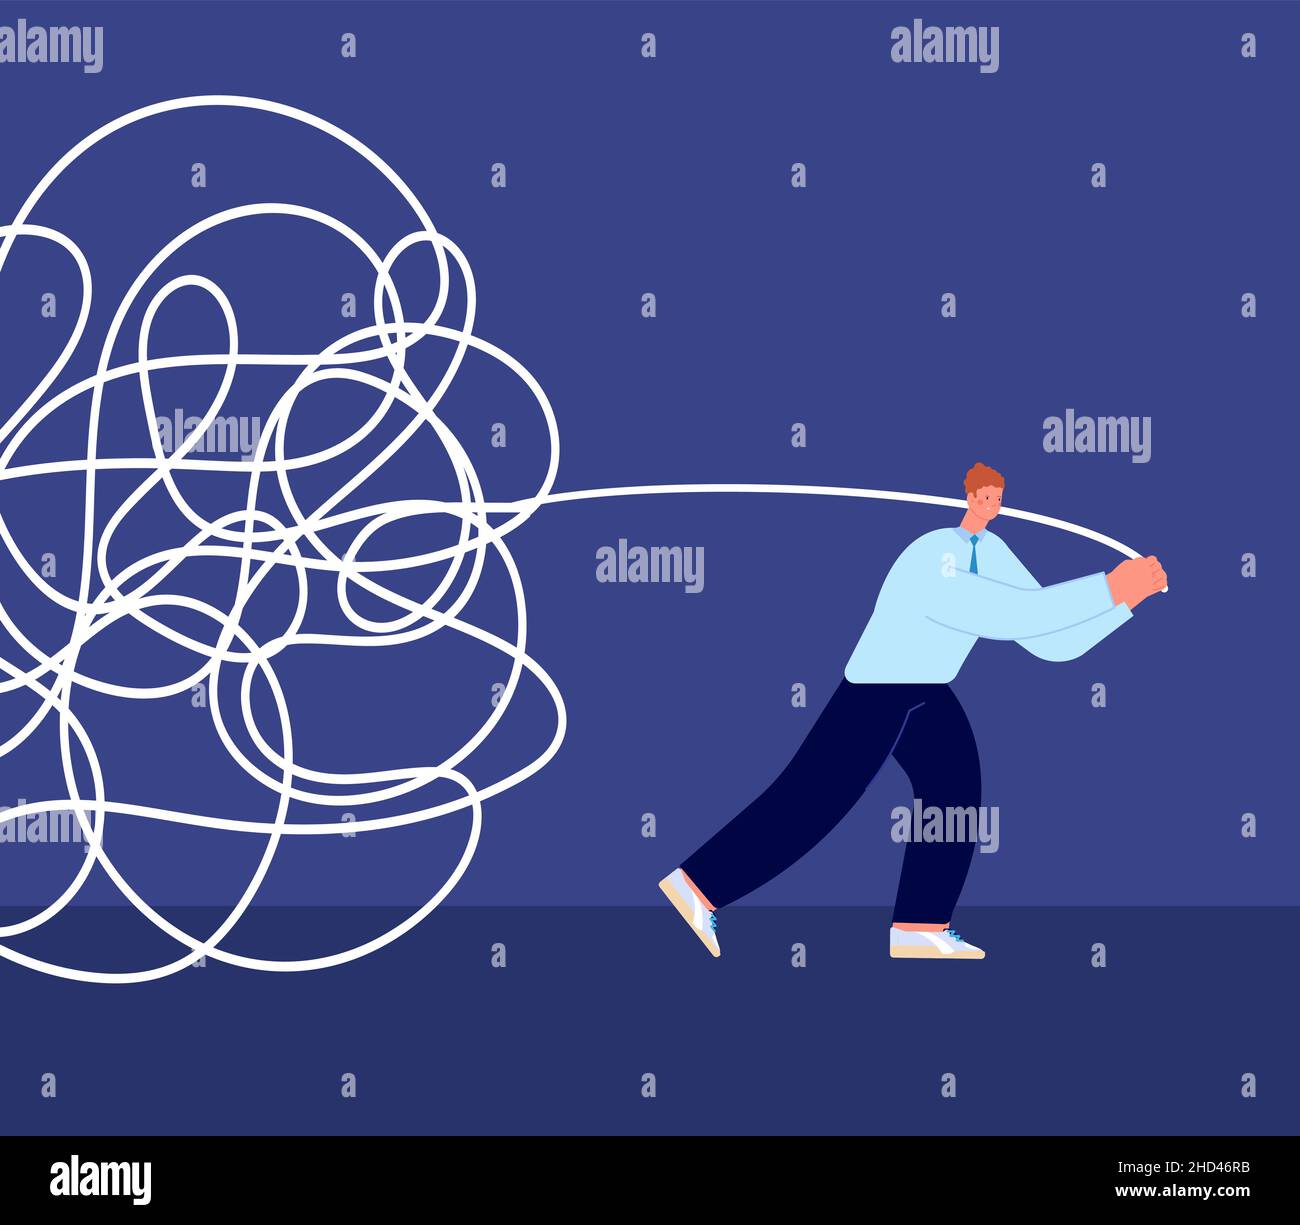 Tangled rope concept. Business problems metaphor. Businessman unraveling chaos. Mental dysfunction, man pulls along past life, vector concept Stock Vector